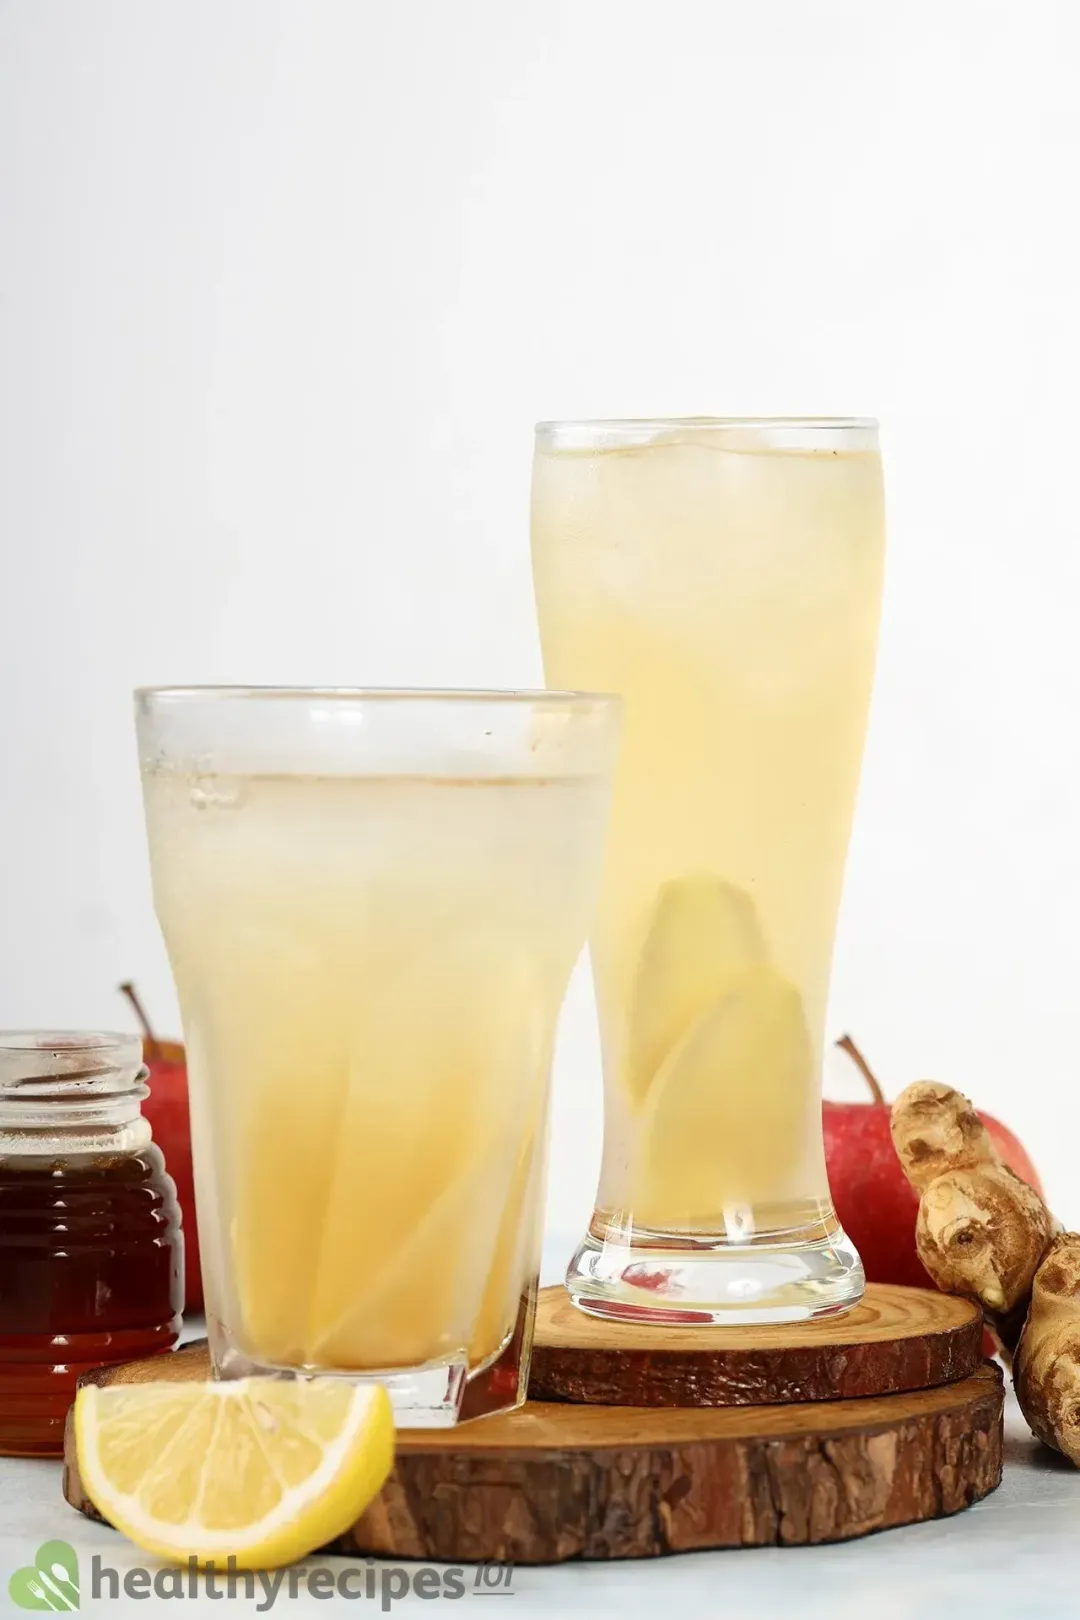 Two tall glasses of apple cider vinegar drinks with ginger slices inside, next to citruses and a jar of honey